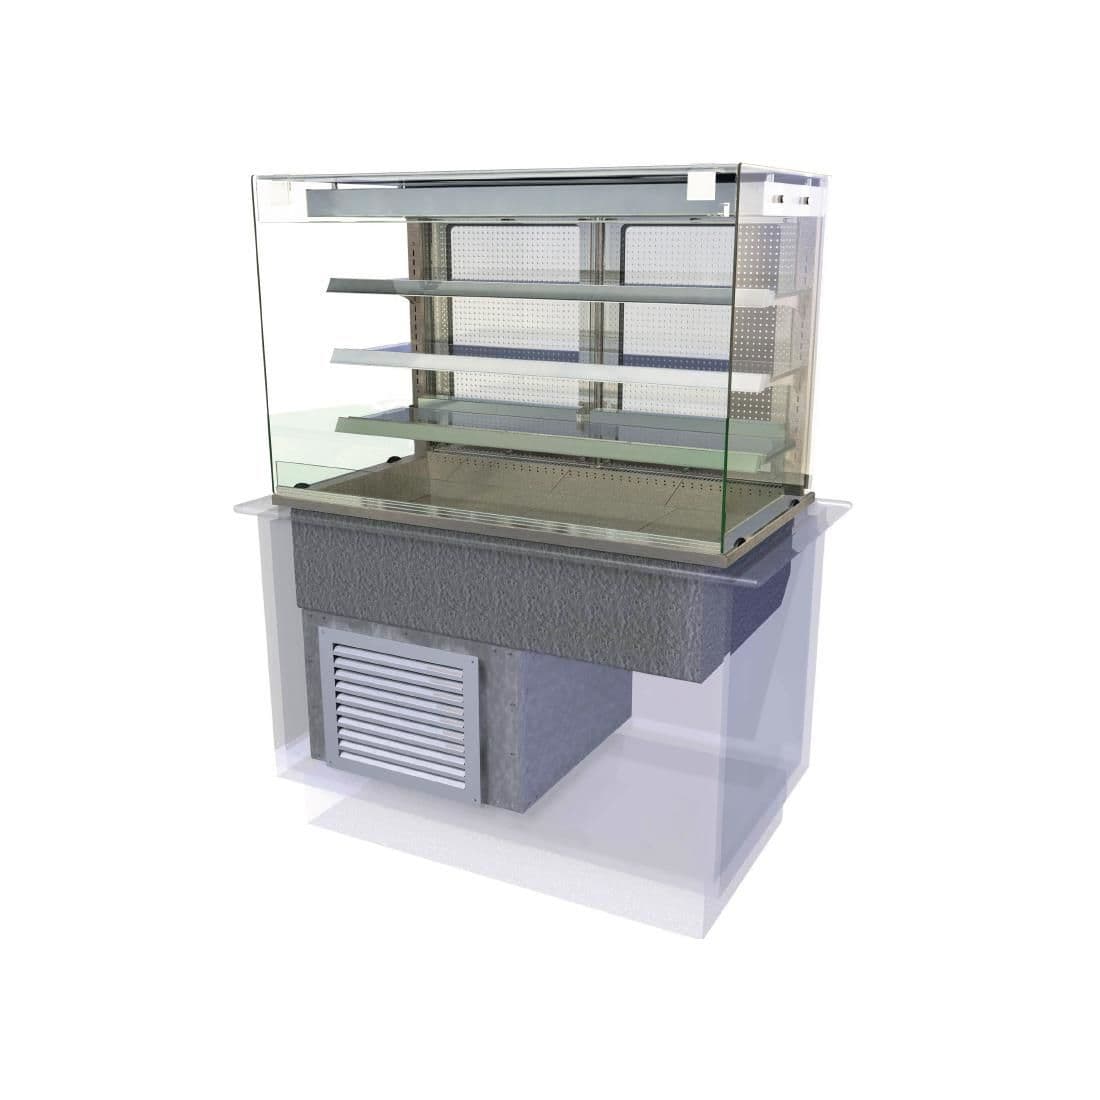 CW646 Kubus Drop In Multideck Self Service 1175mm JD Catering Equipment Solutions Ltd